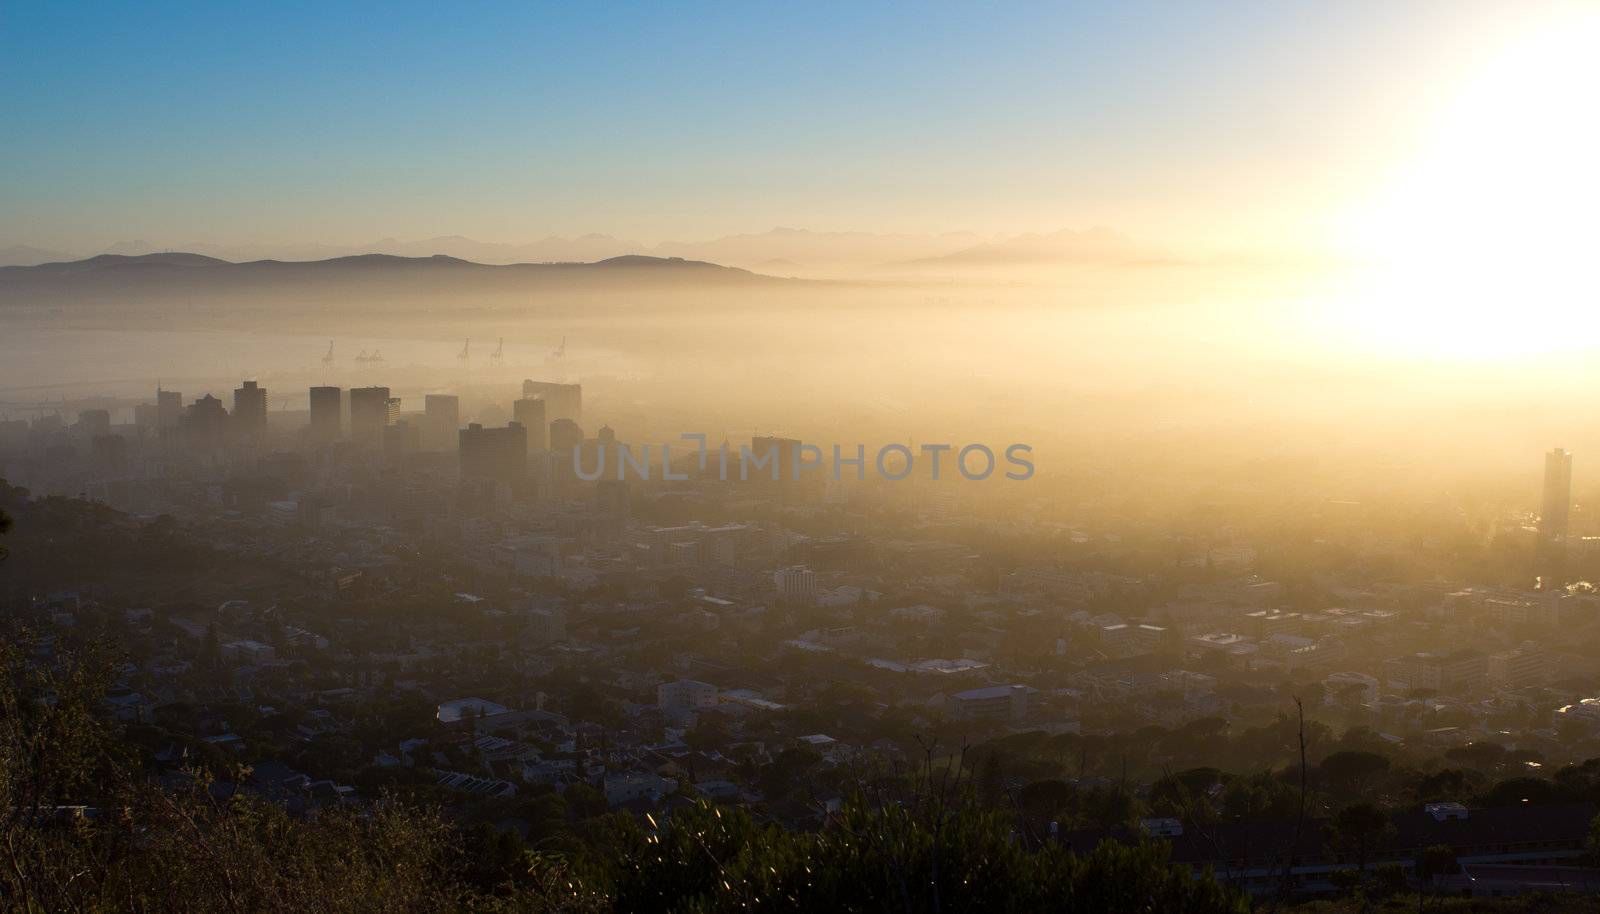 Cape Town On A Misty Morning by dwaschnig_photo